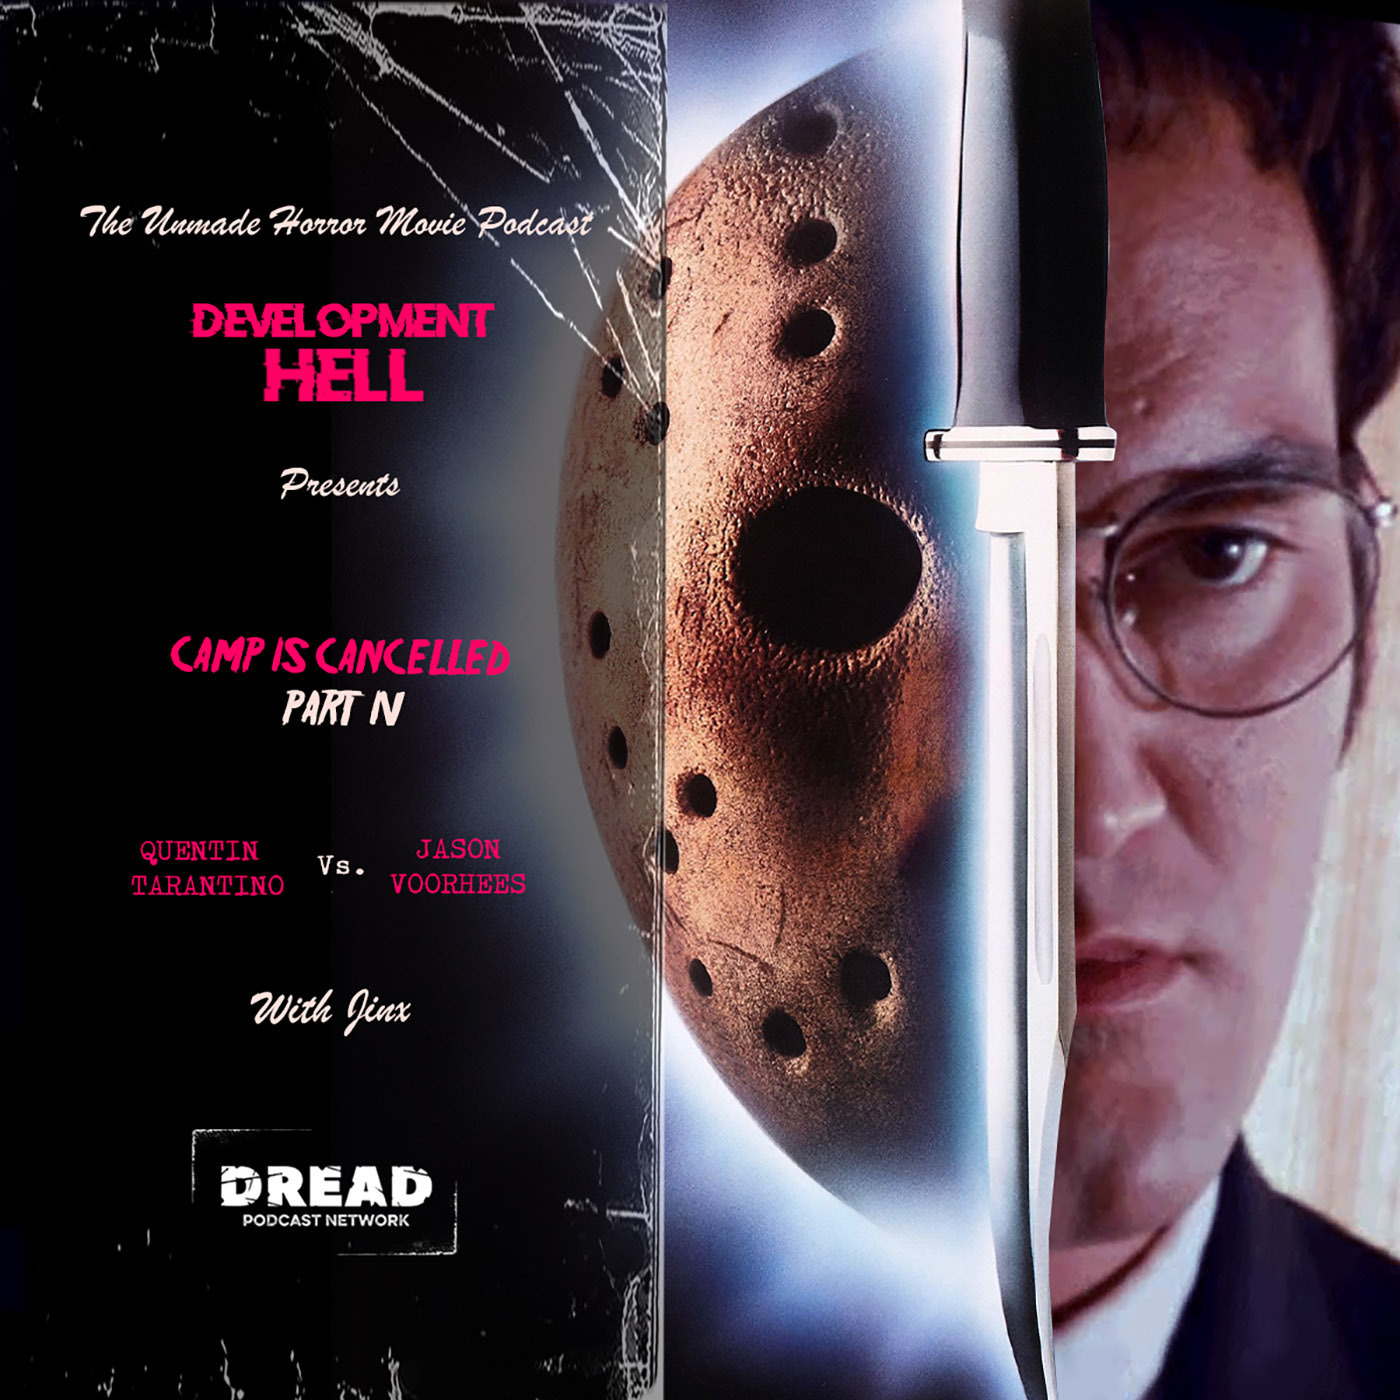 Quentin Tarantino Vs. Jason Voorhees [Camp is Cancelled Part IV]